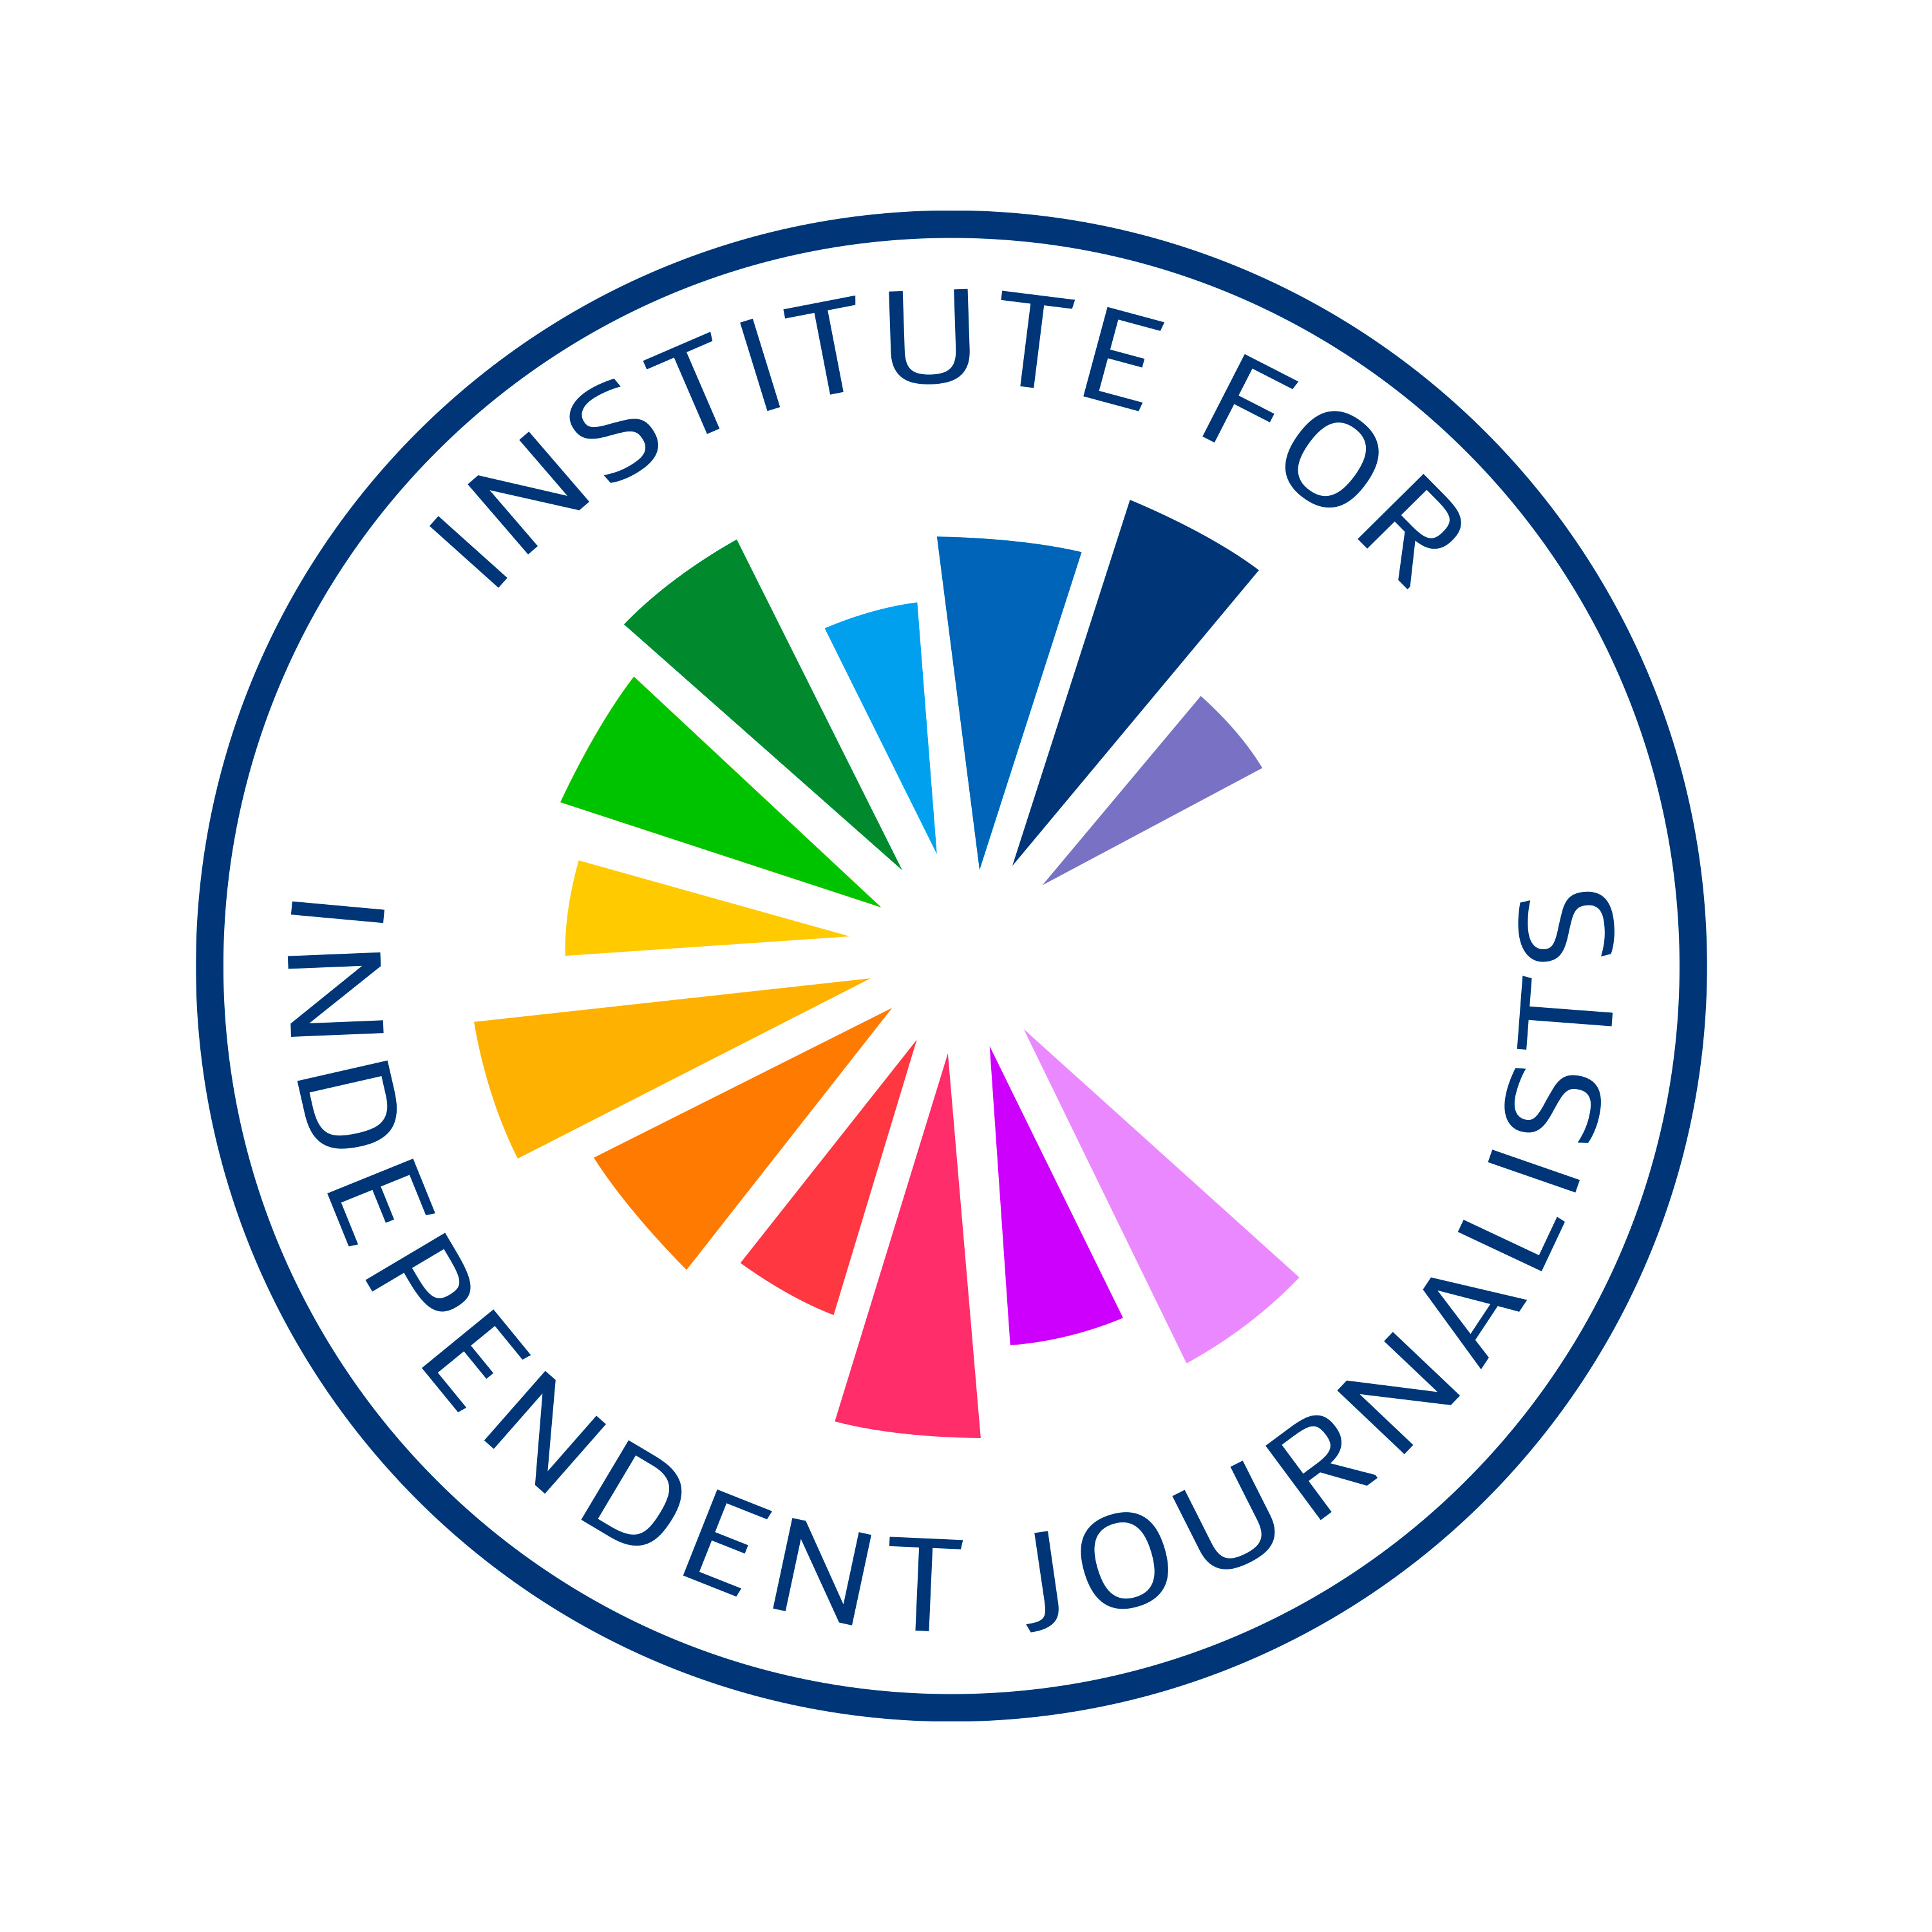 The Institute for Independent Journalists' Newsletter